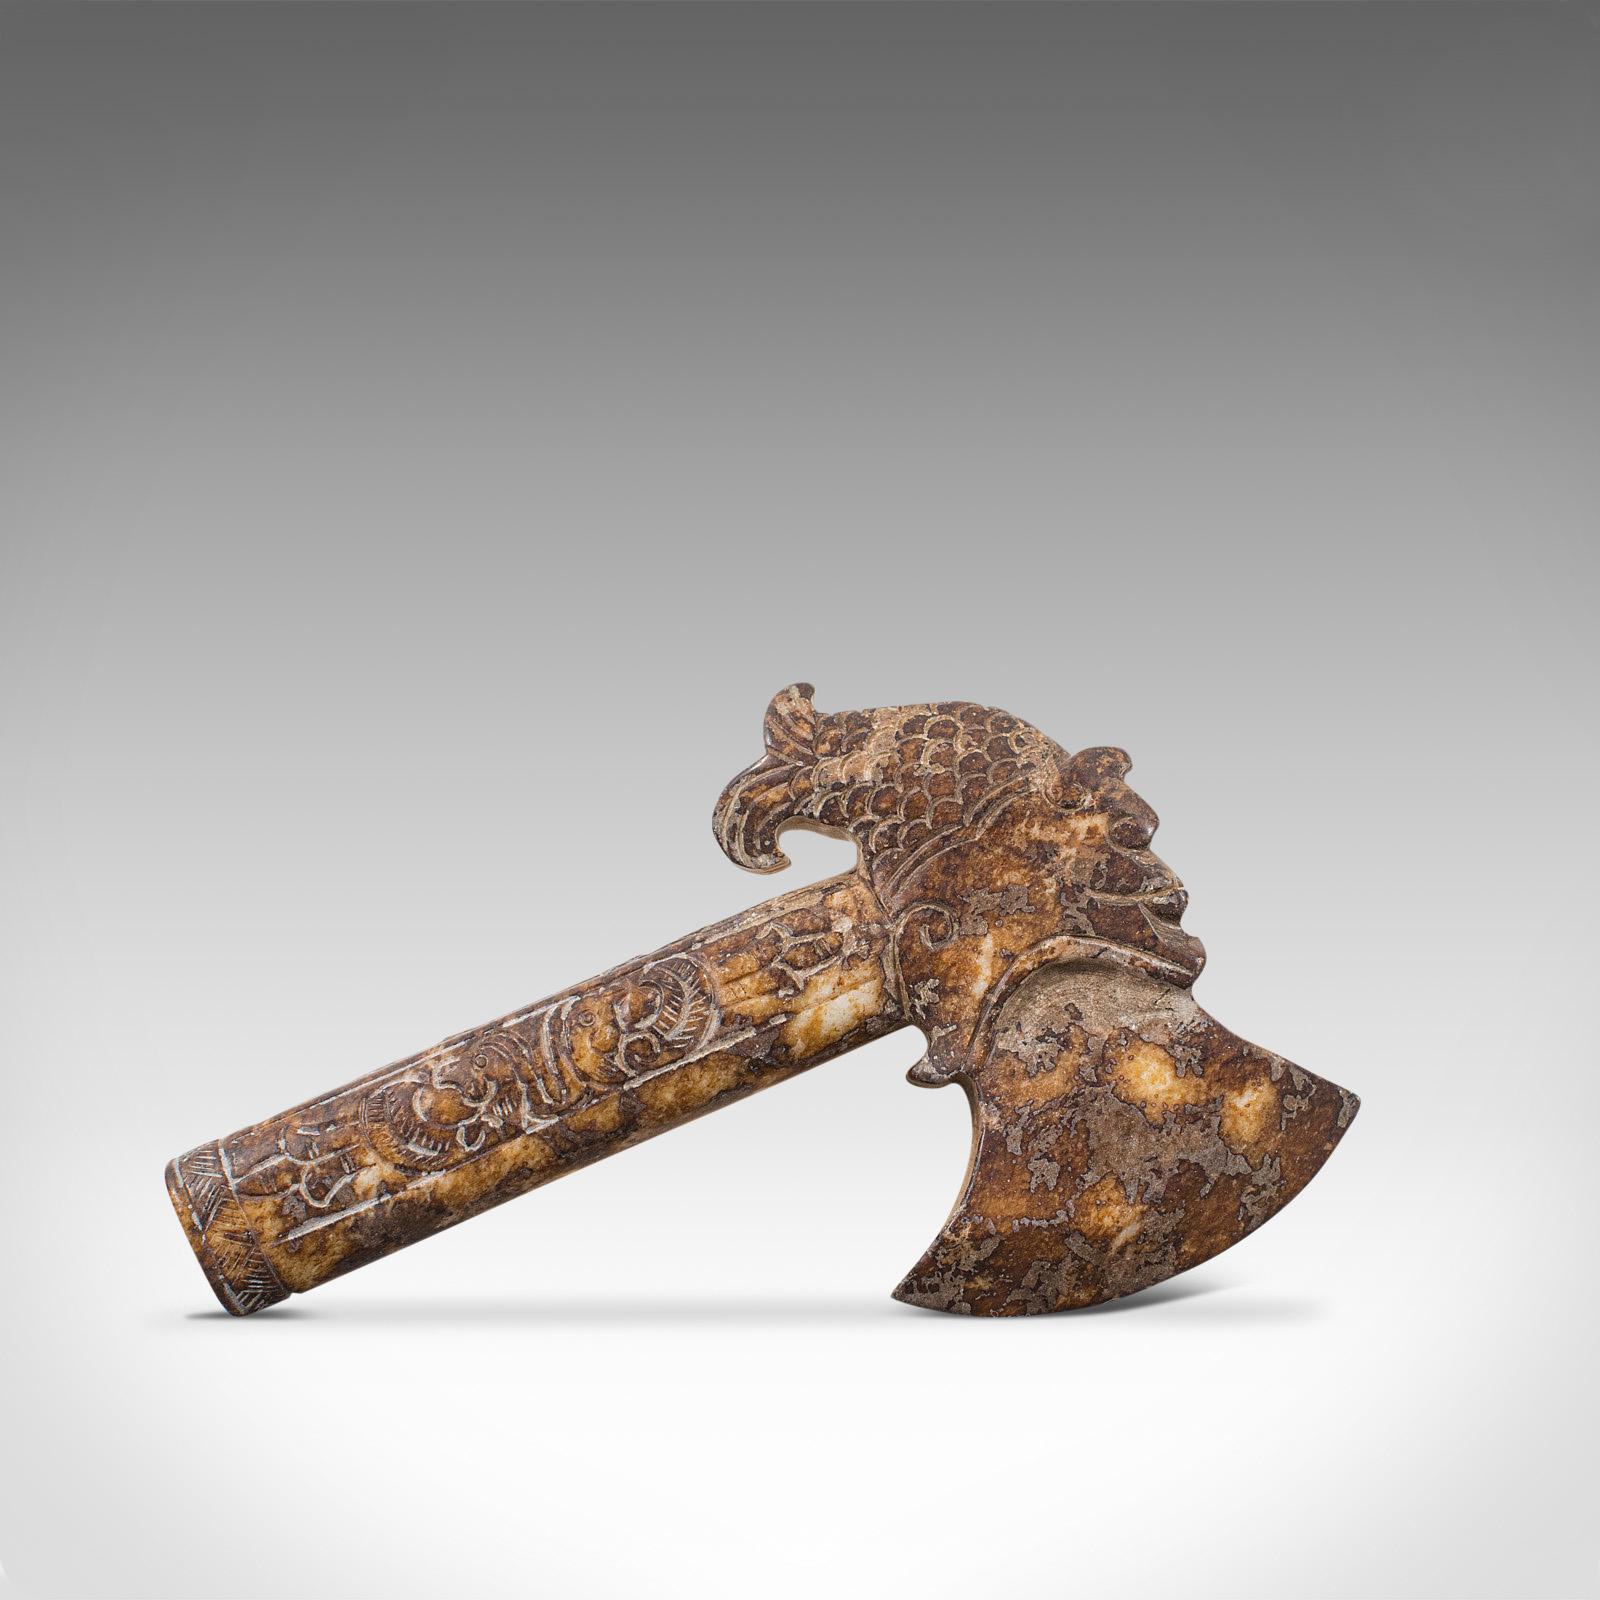 This is an antique ceremonial axe. A Chinese, mottled caramel jade decorative tool redolent of the Shang Dynasty, dating to the mid-19th century, circa 1850.

Striking colouration catches the eye
Displays a desirable aged patina
Heavily mottled